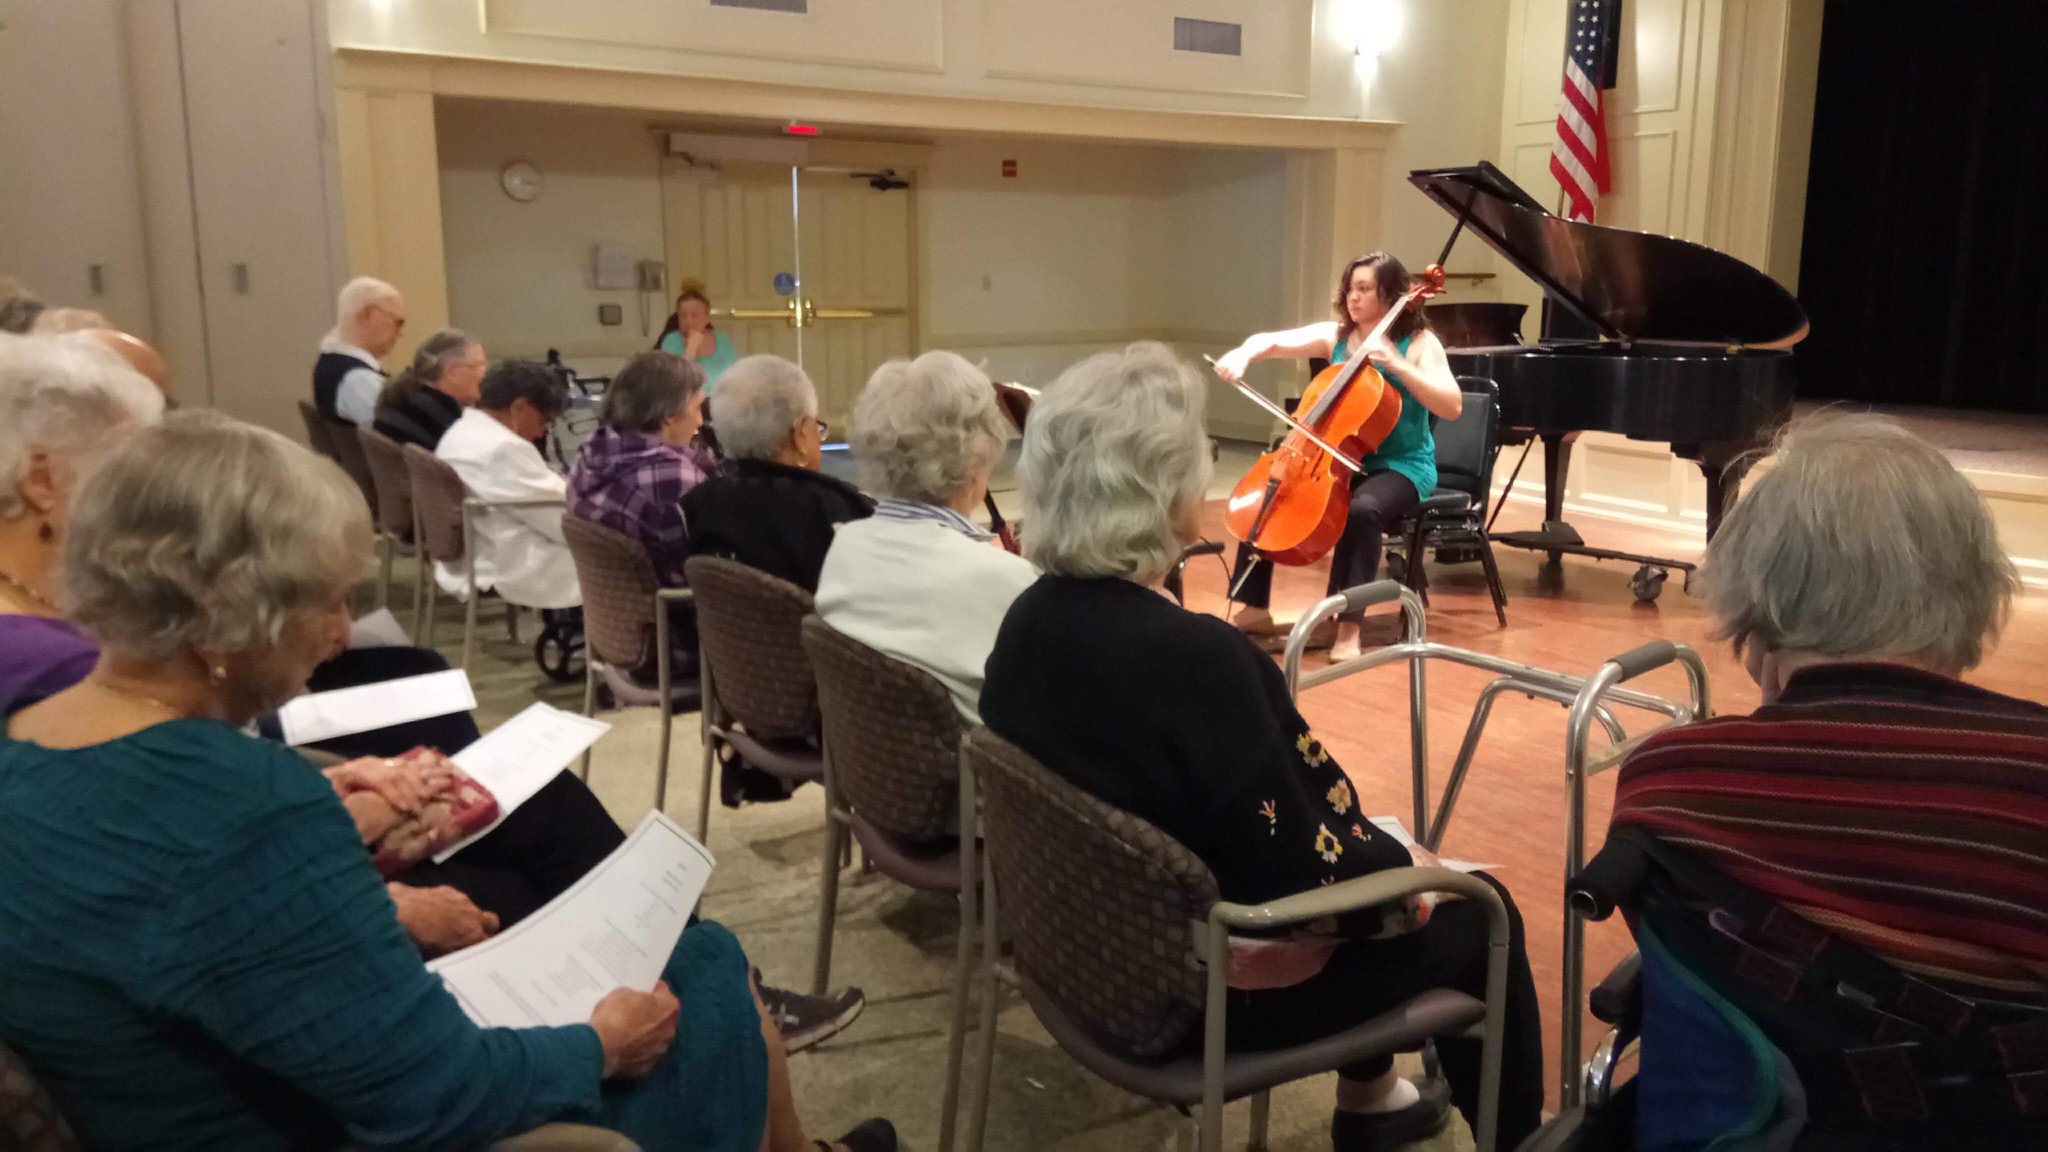 Samantha Flores, 28, gave a cello recital on March 20 as part of a program that connects young people with residents of a retirement community in Mitchellville, Md. Credit: Ying-Shan Su via the New York Times.